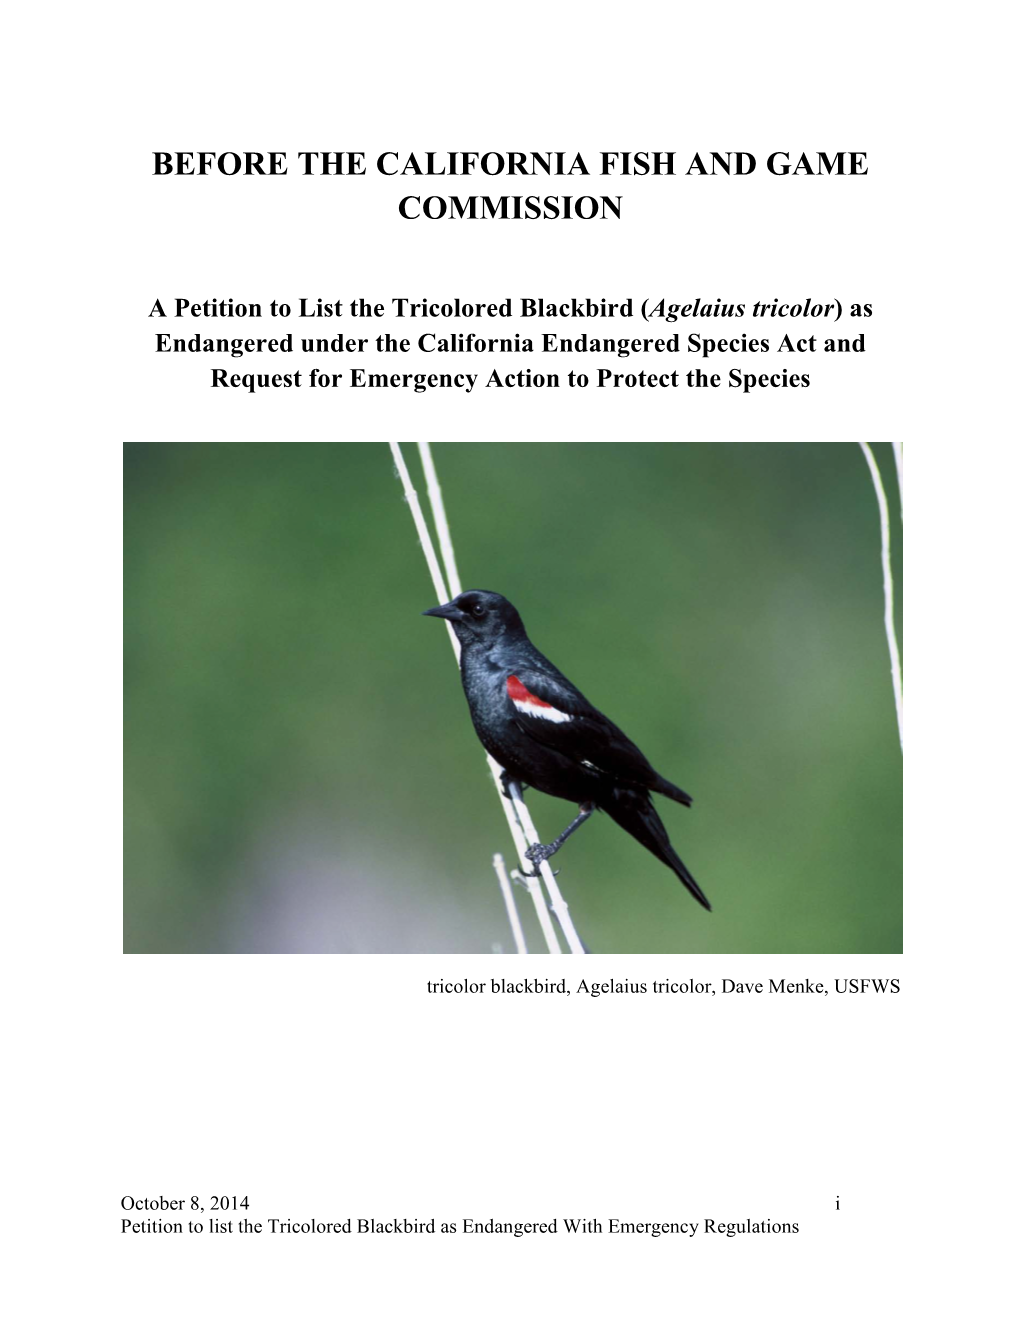 Endangered Species Act Petition to List the Tricolored Blackbird